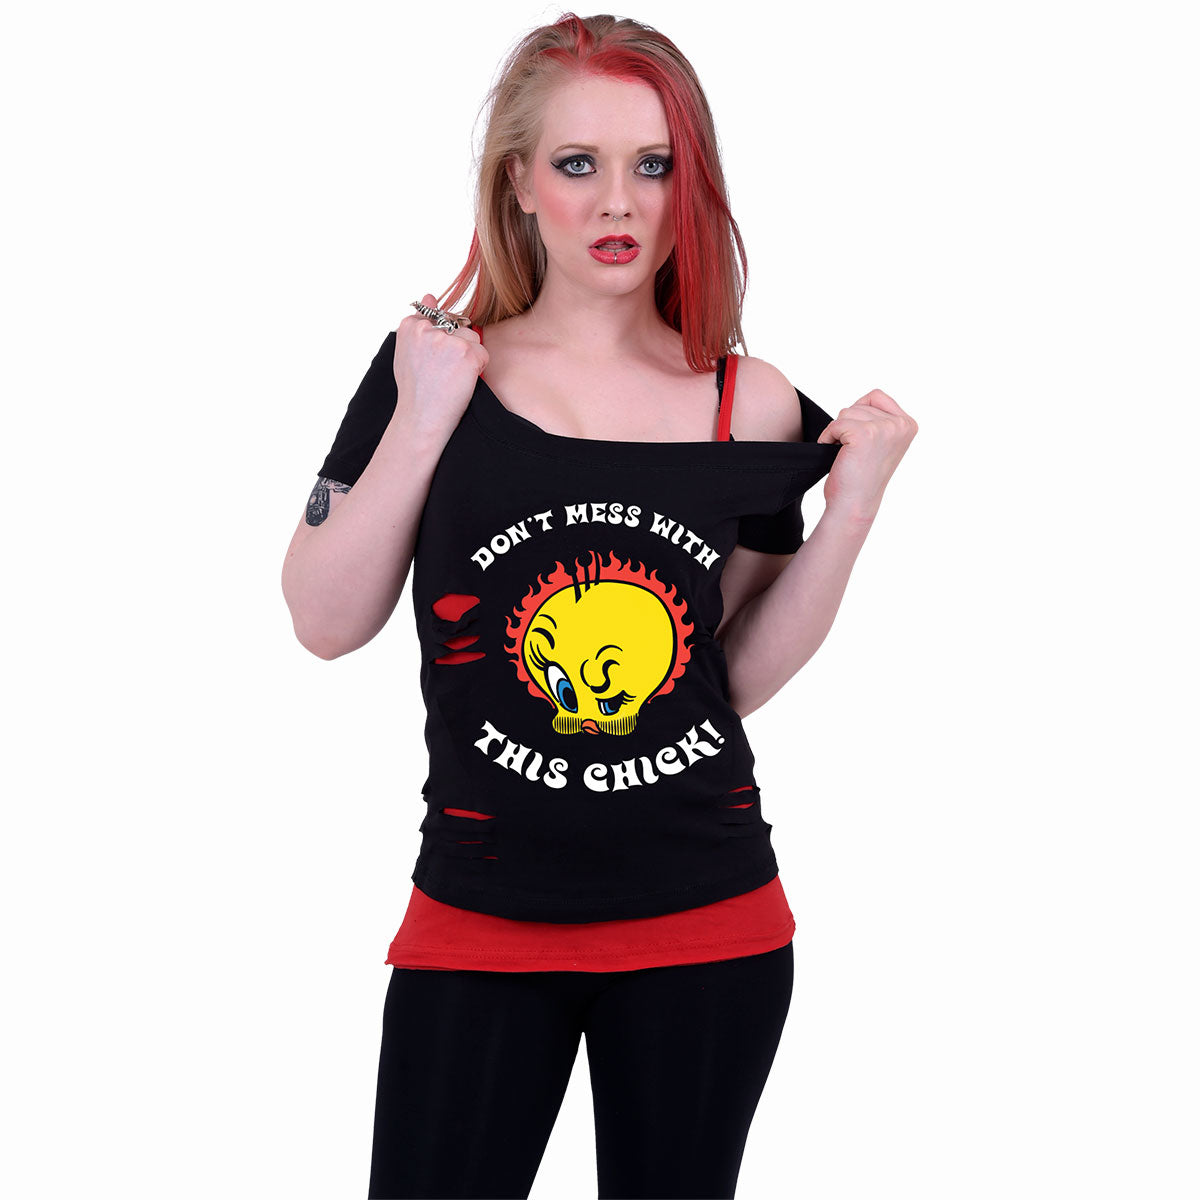 TWEETY - TOUGH CHICK - 2w1 Red Ripped Top Czarny